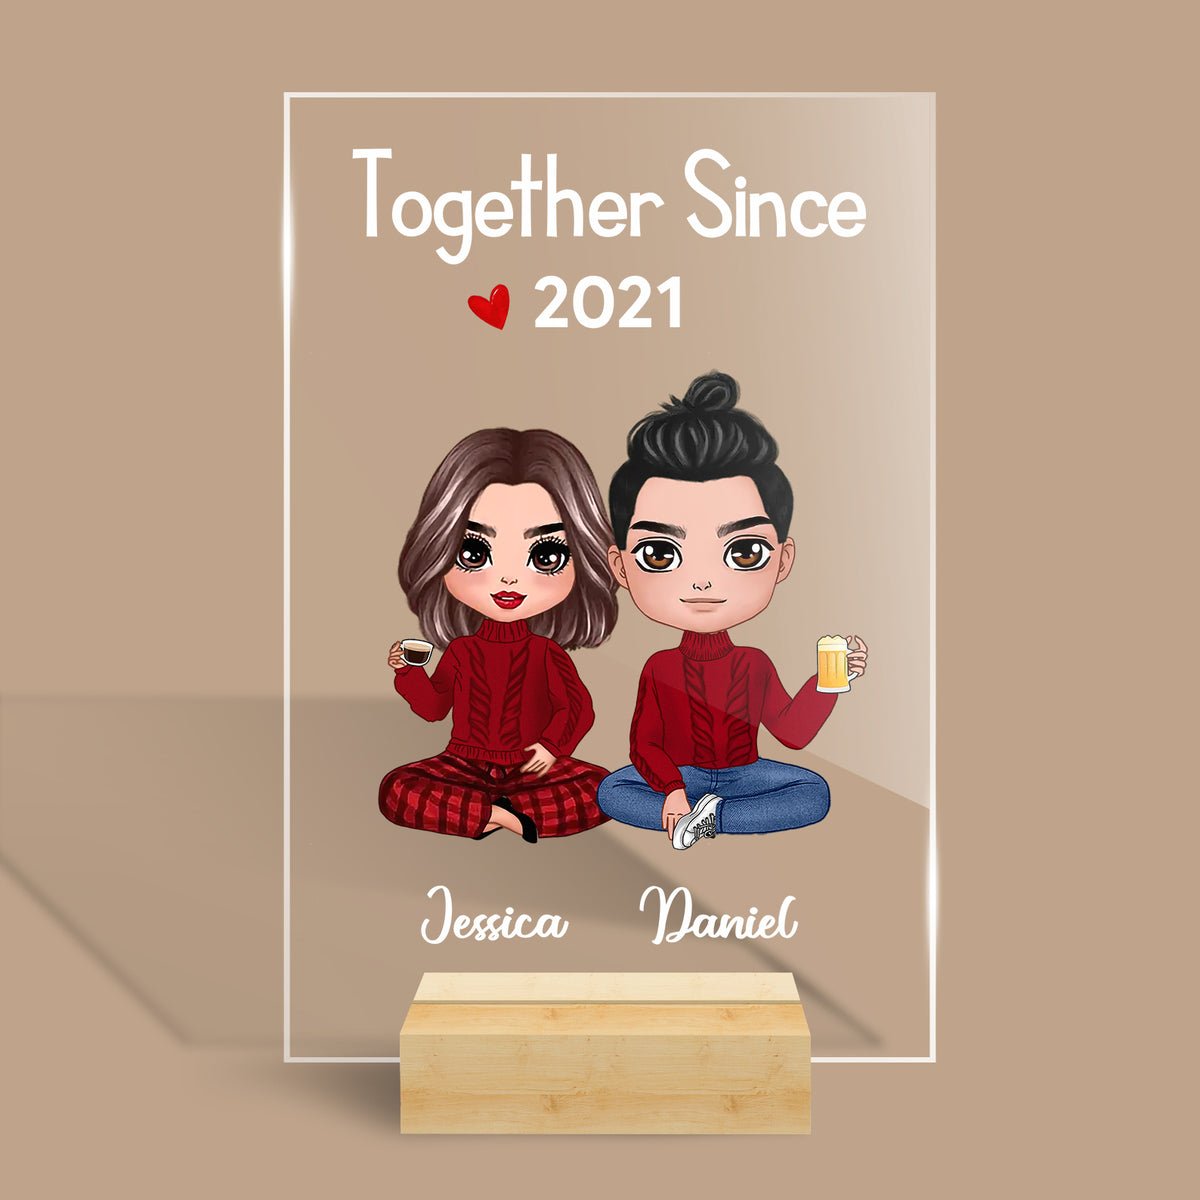 Together Since Doll Couple - Personalized Acrylic Plaque